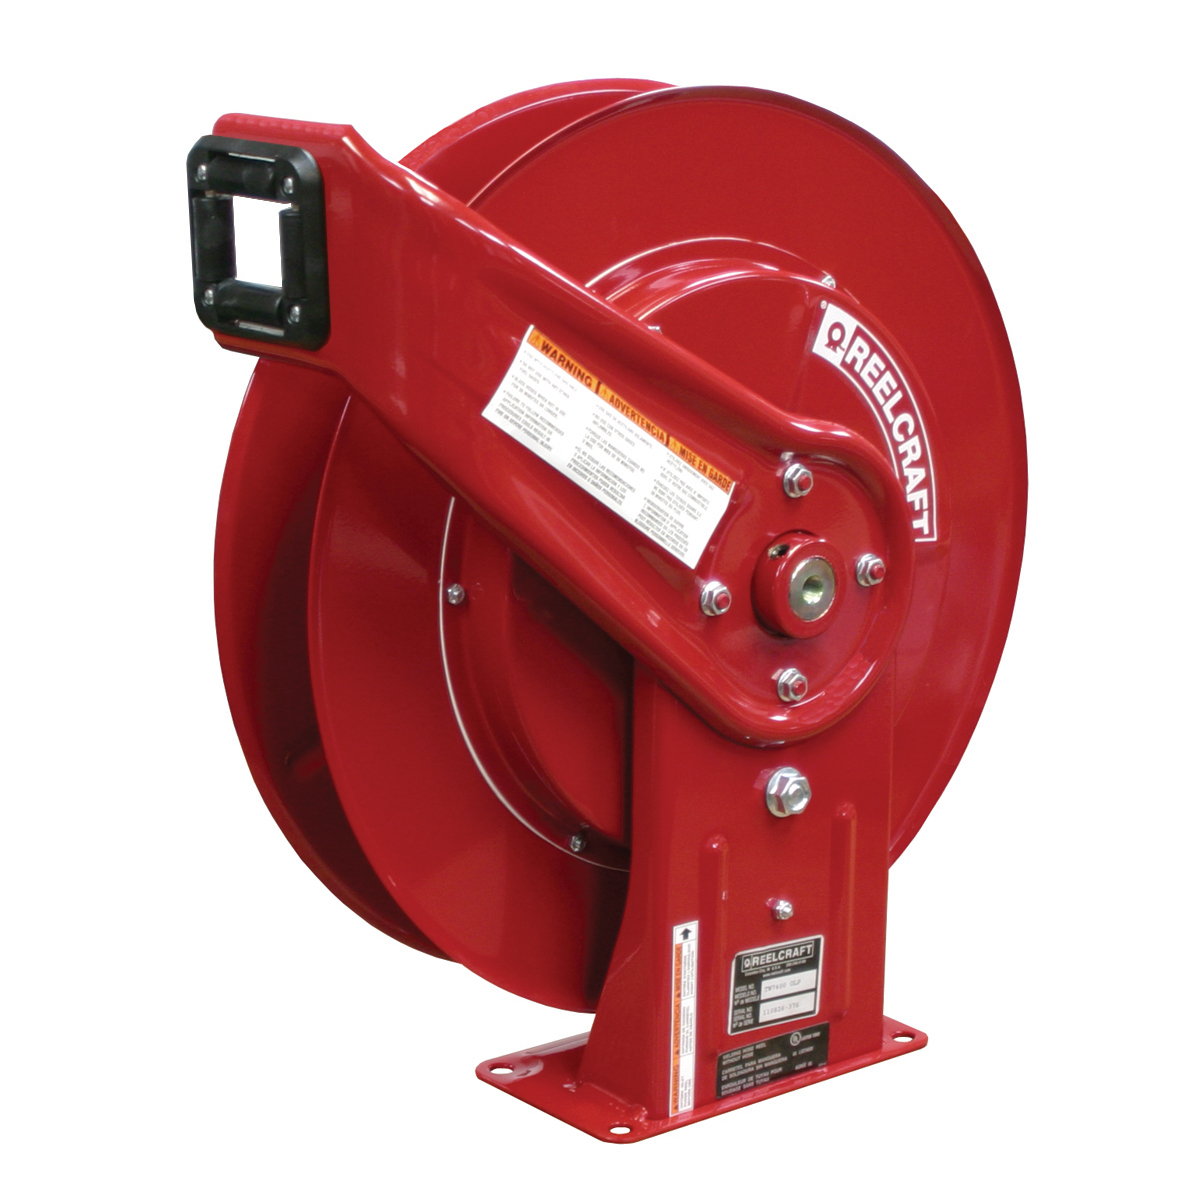 Tw7400 Olp 0.25 In. X 60 Ft. Heavy Duty 200 Psi Gas Weld Without Hose Reel, Red